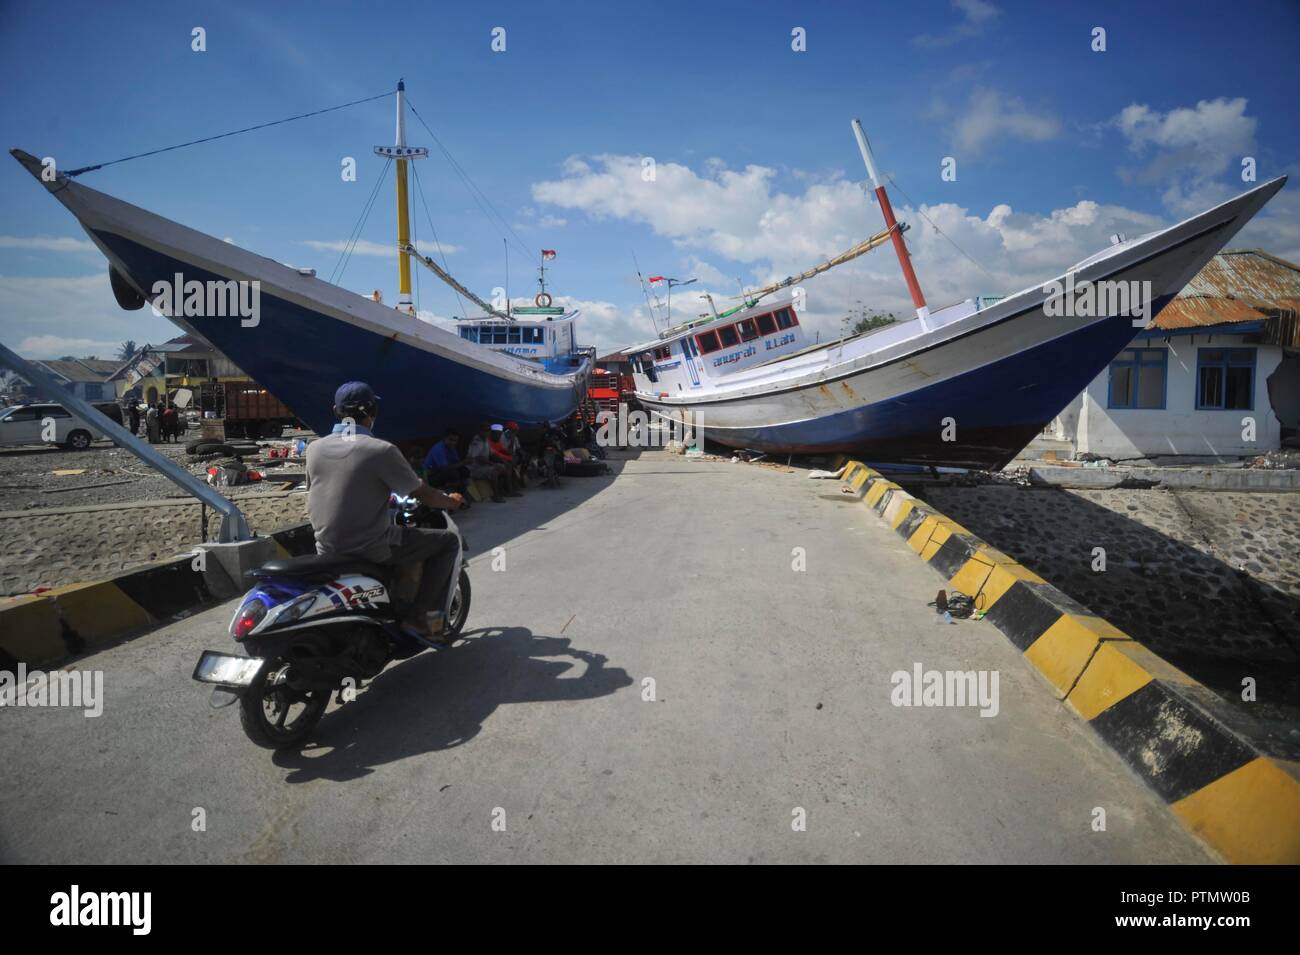 Poso, Indonesia. 10th Oct, 2018. Wooden boats are stranded at Pantoloan port in Poso, Central Sulawesi Province, Indonesia, on Oct. 10, 2018. The earthquakes and the tsunami have killed at least 2,010 people, left over 5,000 others missing and triggered massive damage and a huge evacuation, according to the national disaster management agency. Credit: Zulkarnain/Xinhua/Alamy Live News Stock Photo